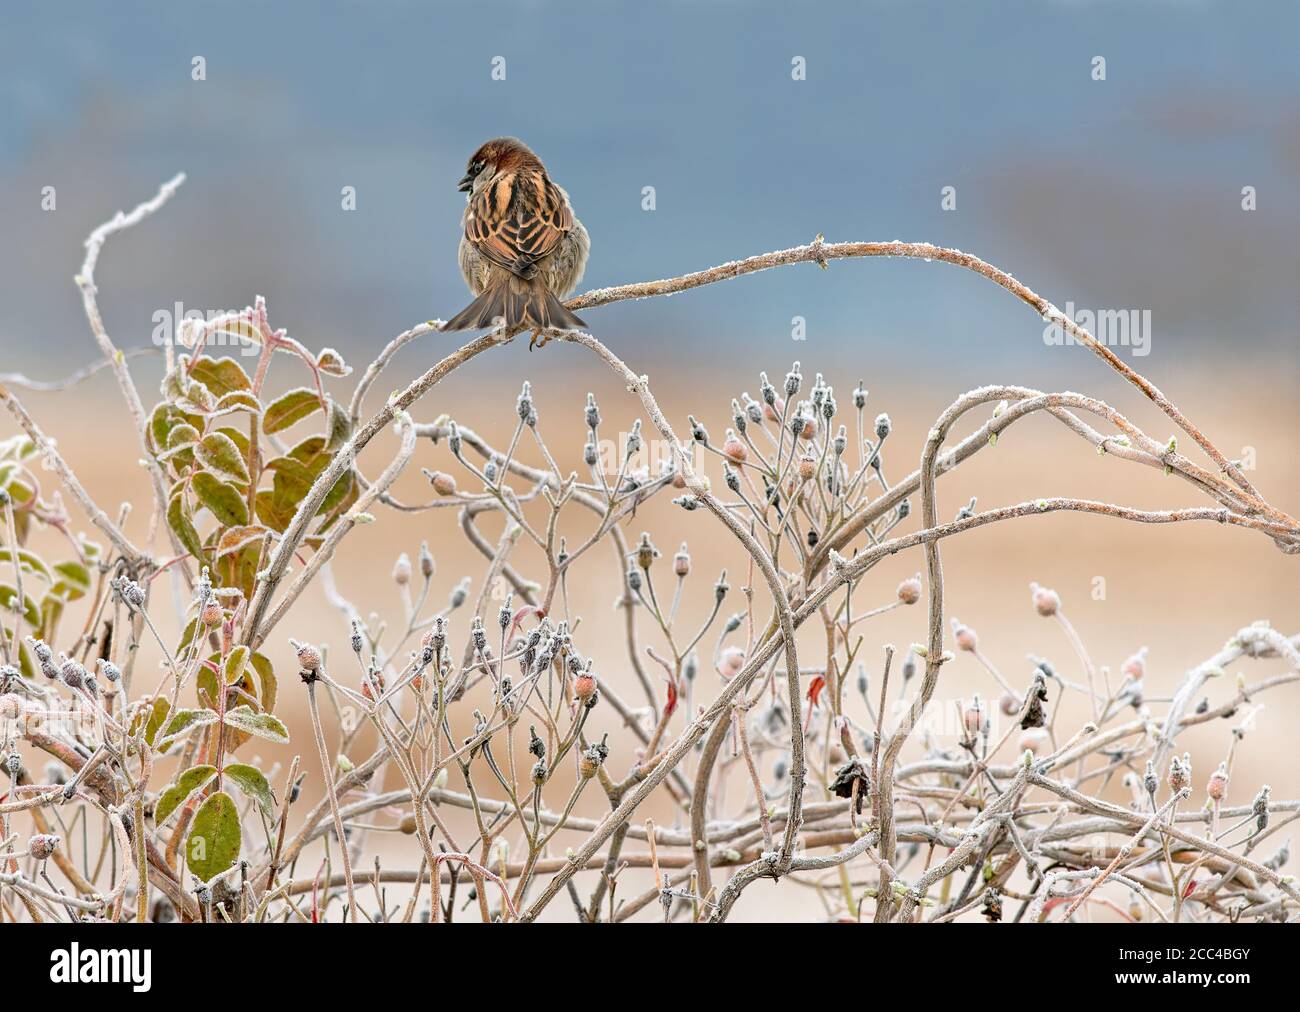 House Sparrow (Passer domesticus) perched on frosty shrubs Stock Photo